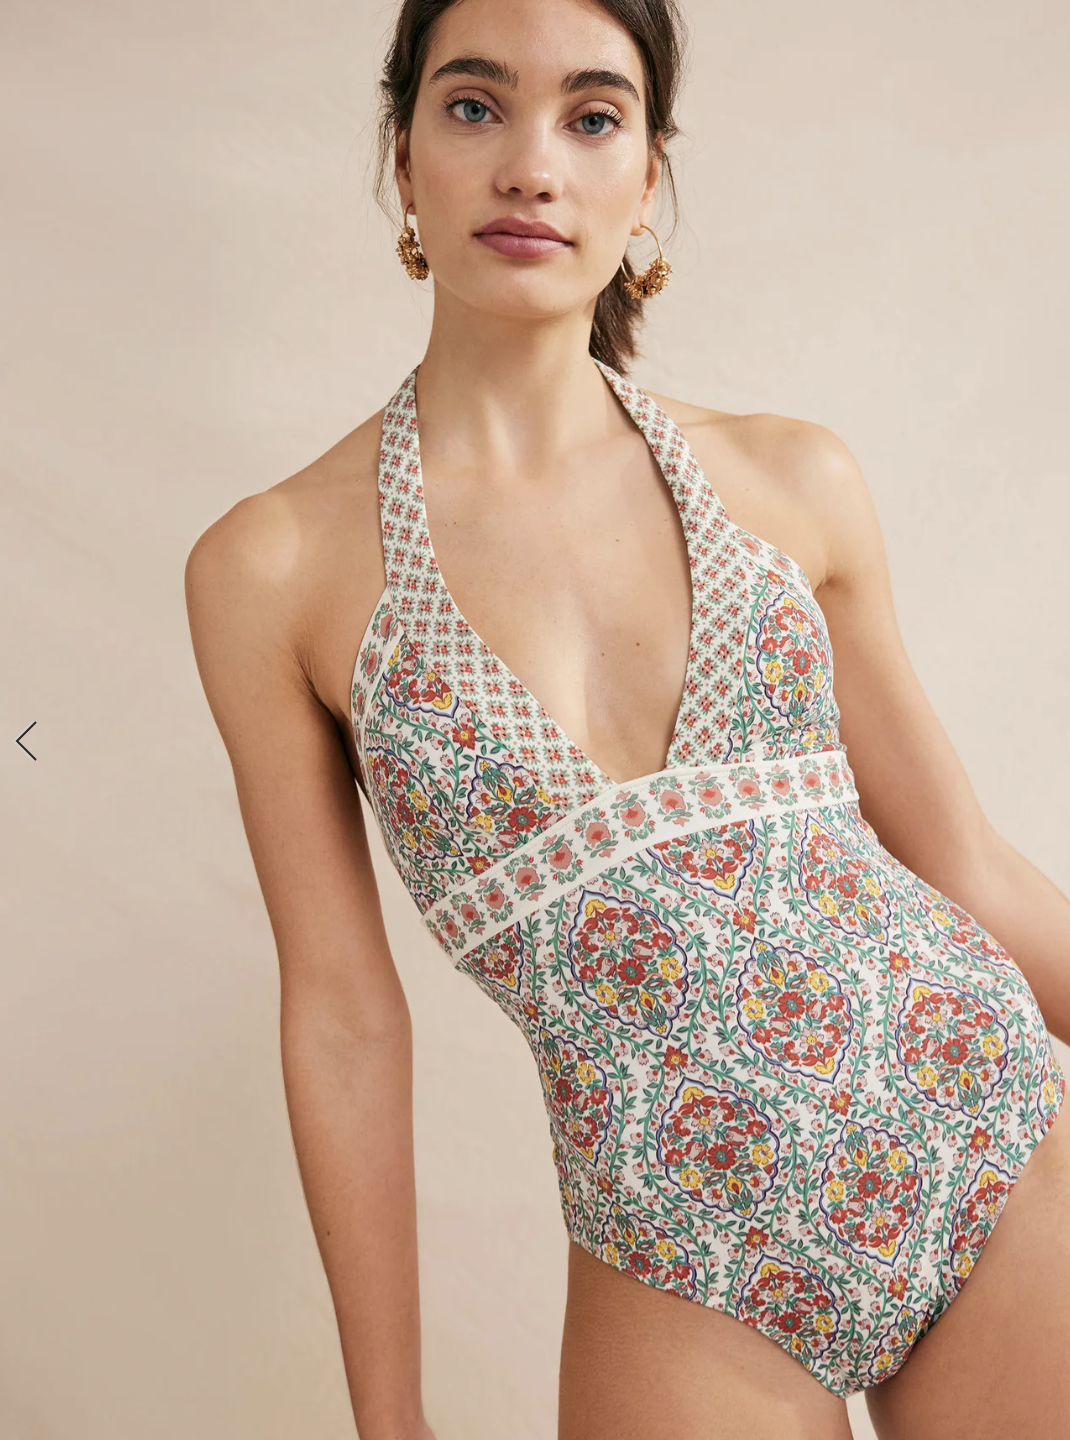 A model in a printed halter one piece.